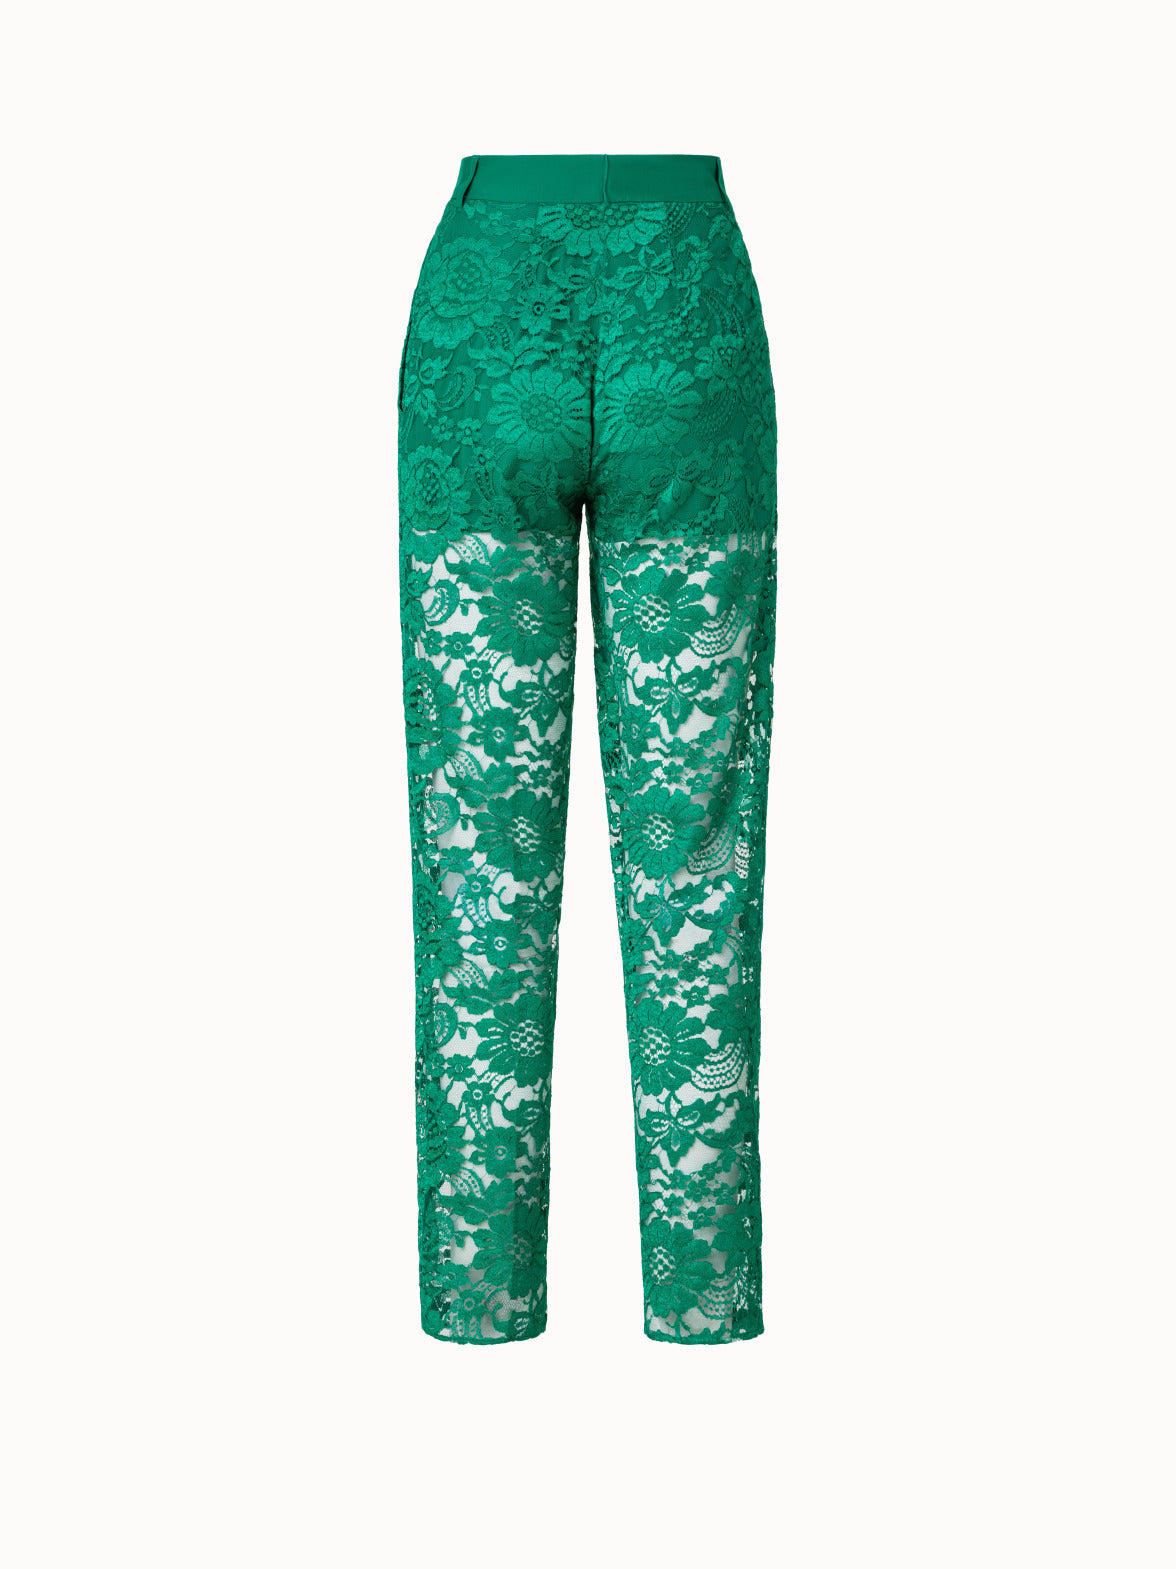 Ana Alcazar Lace trousers with glitter thread in green/ white/ black